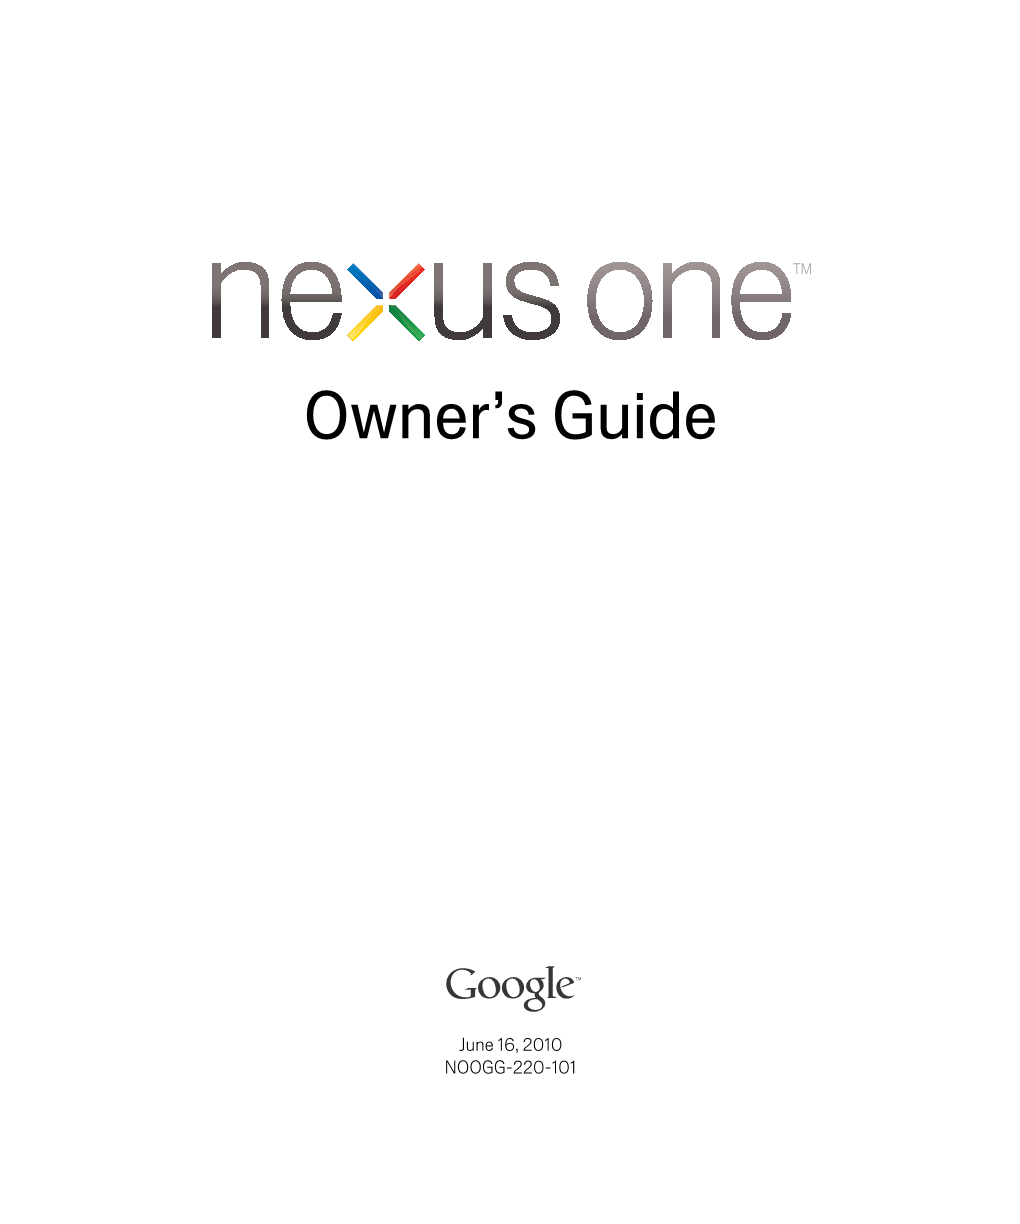 Owner's Guide